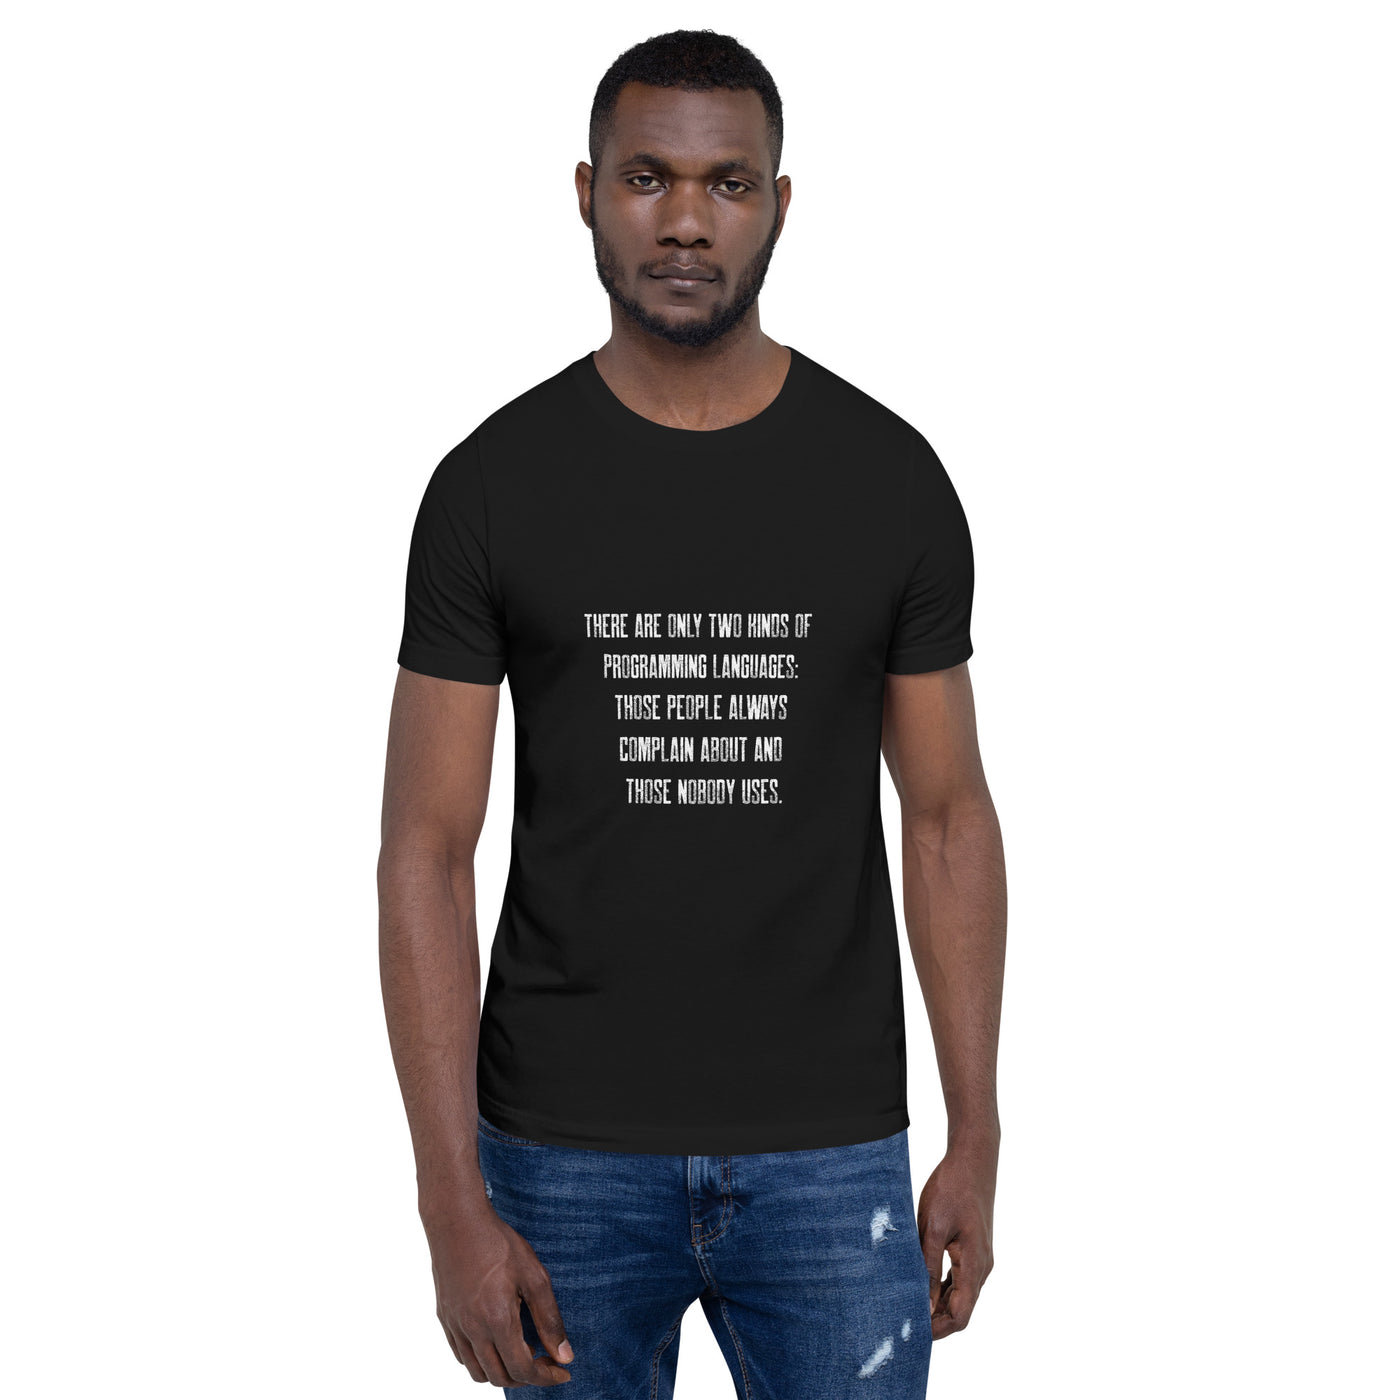 There are only two kinds of programming languages those people always complain about and those nobody uses V1 - Unisex t-shirt